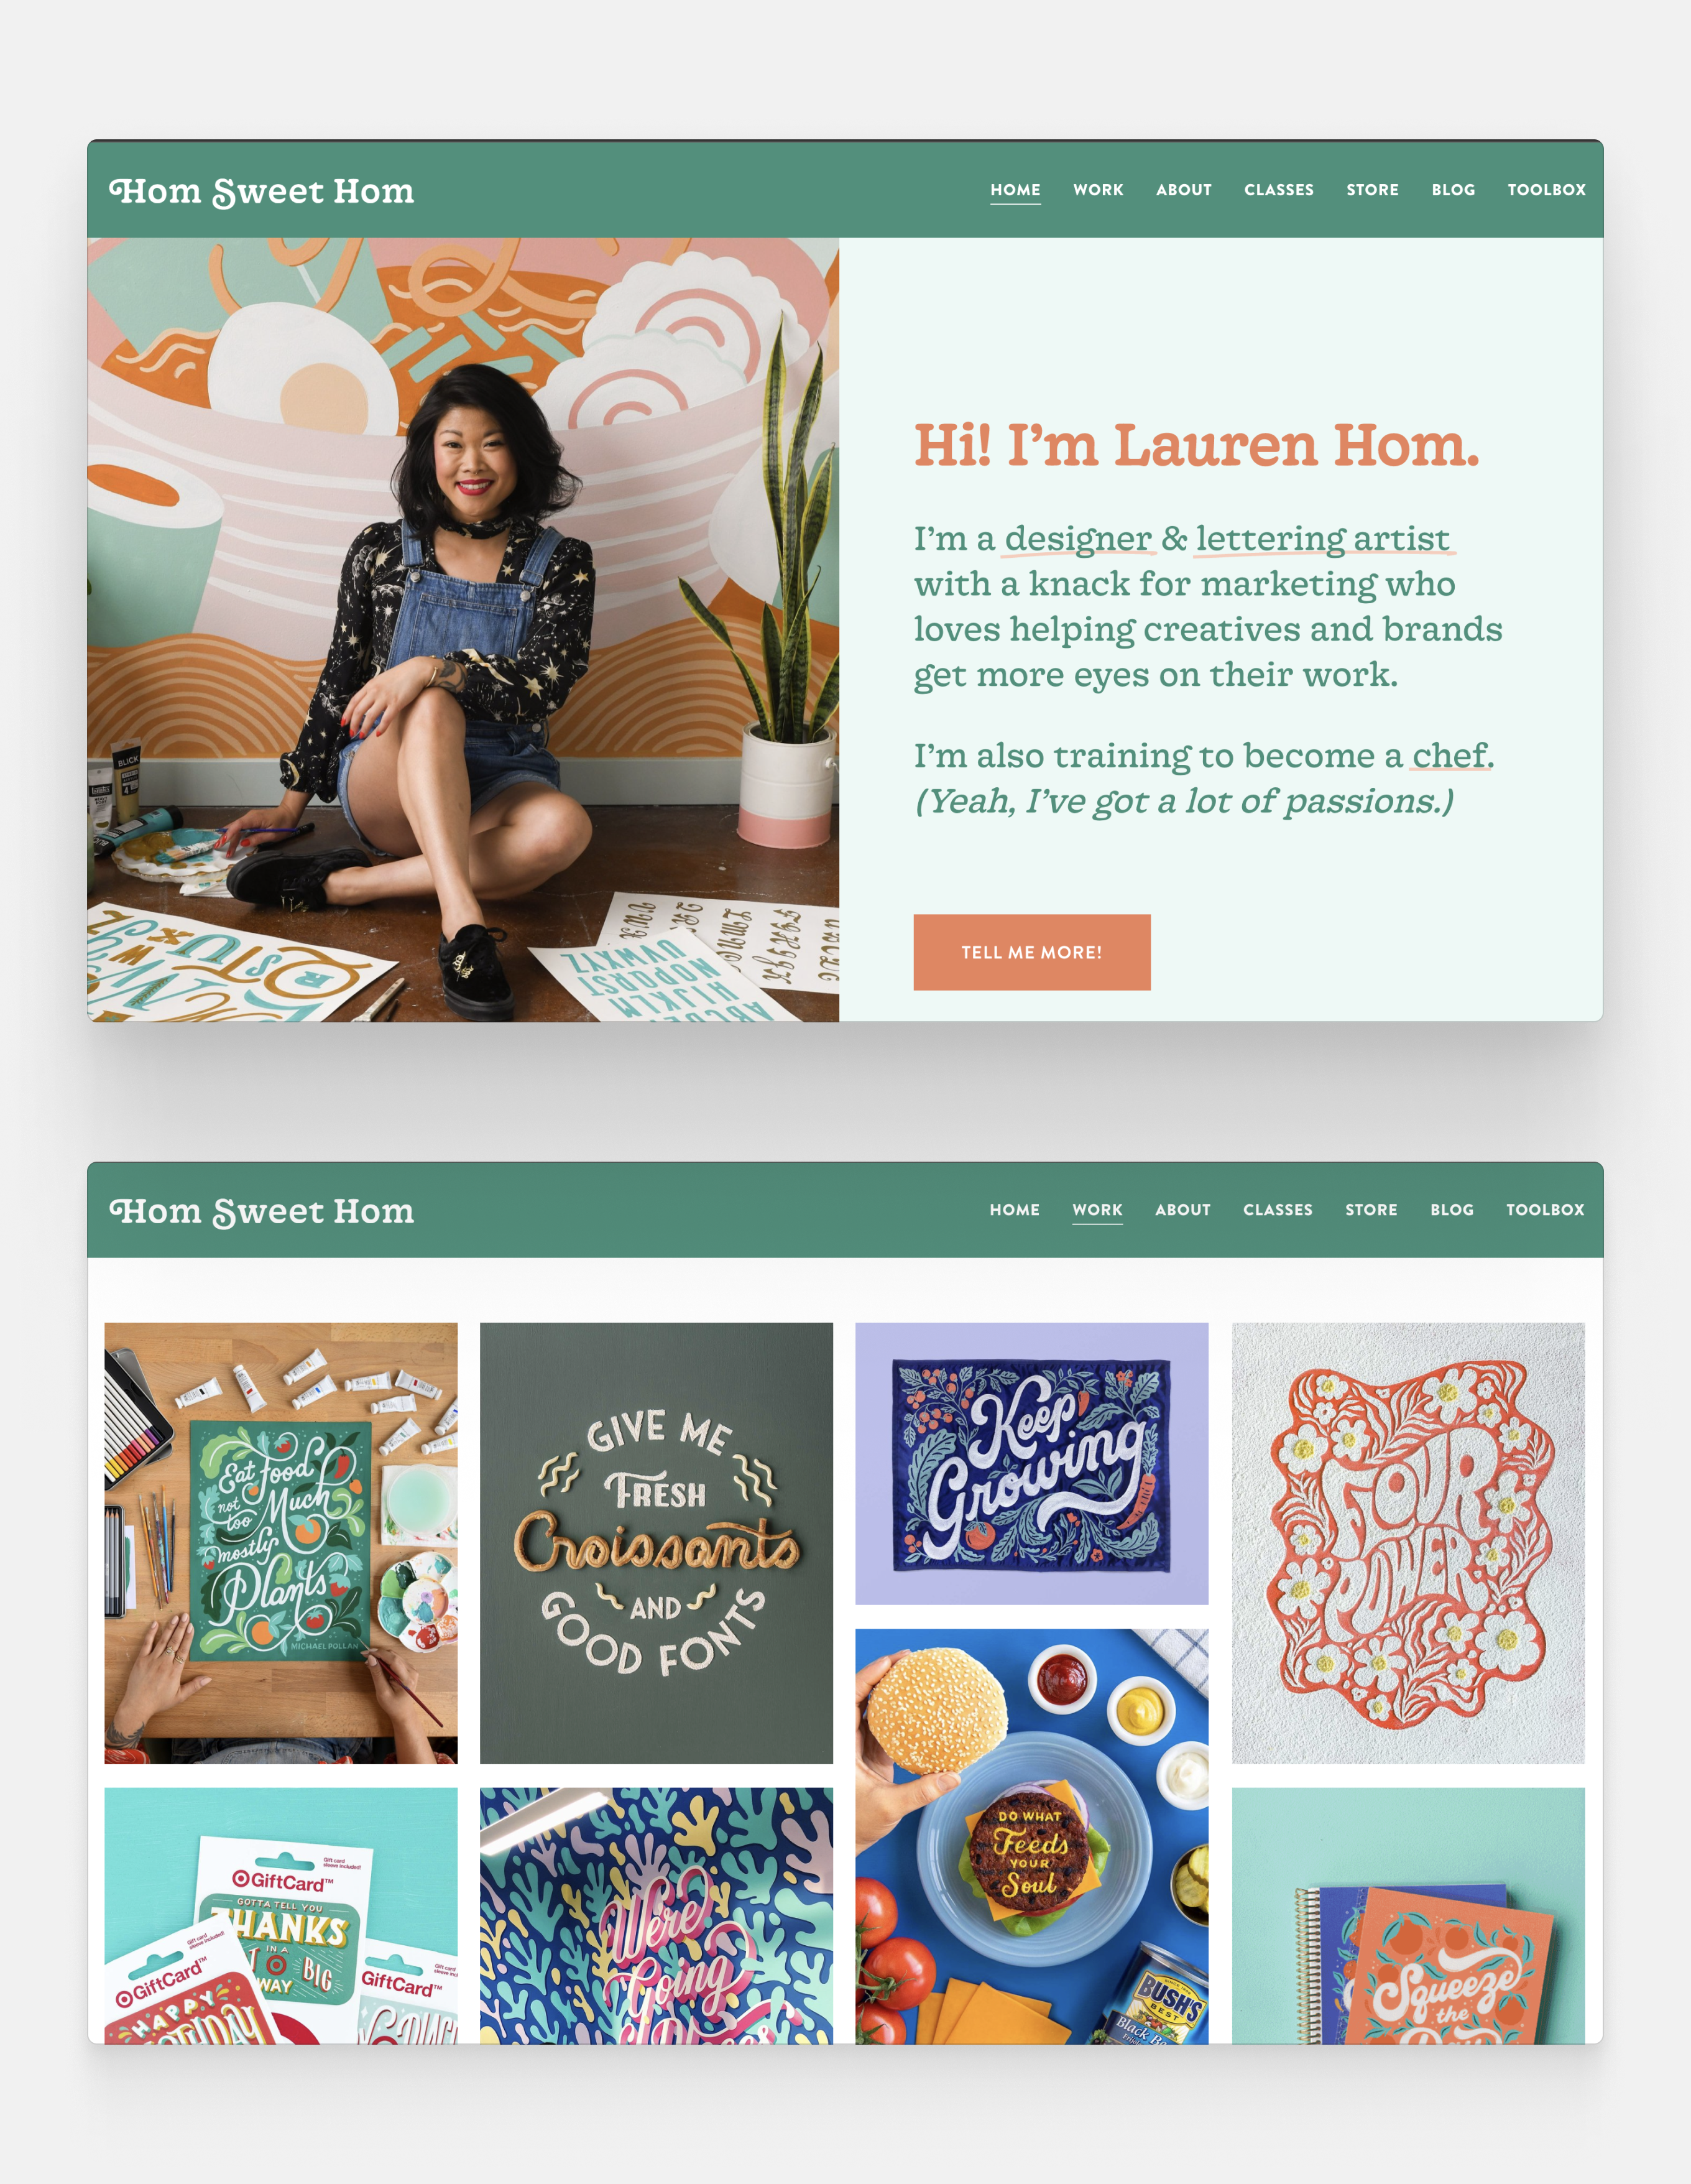 A professional portfolio: the landing page describes the designer's background. scrolling further down we can see photos of her hand-lettering designs in a tile view.